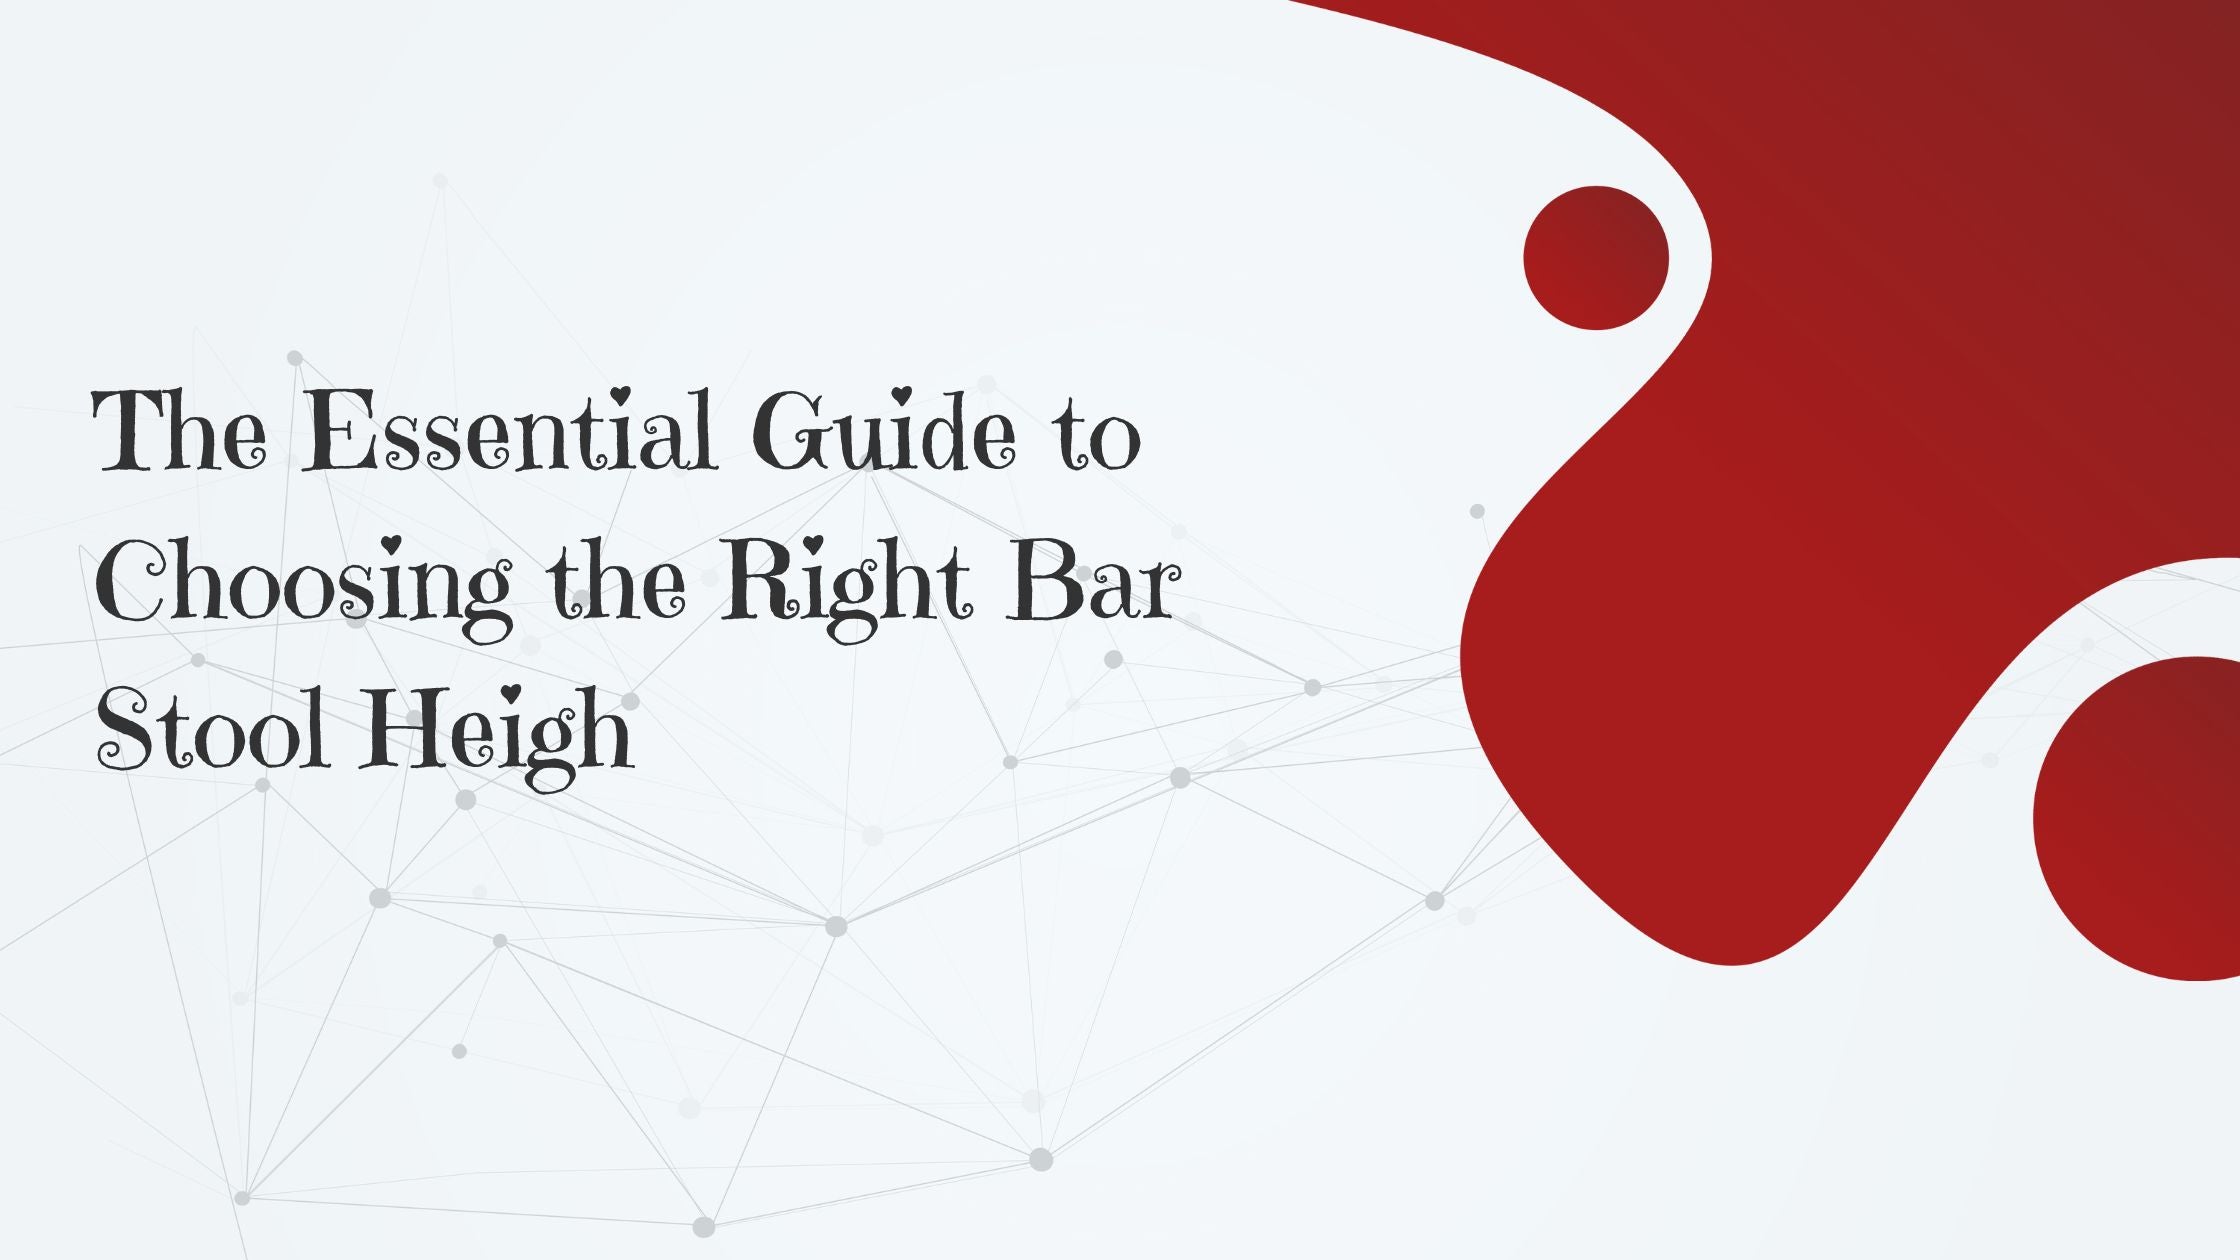 The Essential Guide to Choosing the Right Bar Stool Height